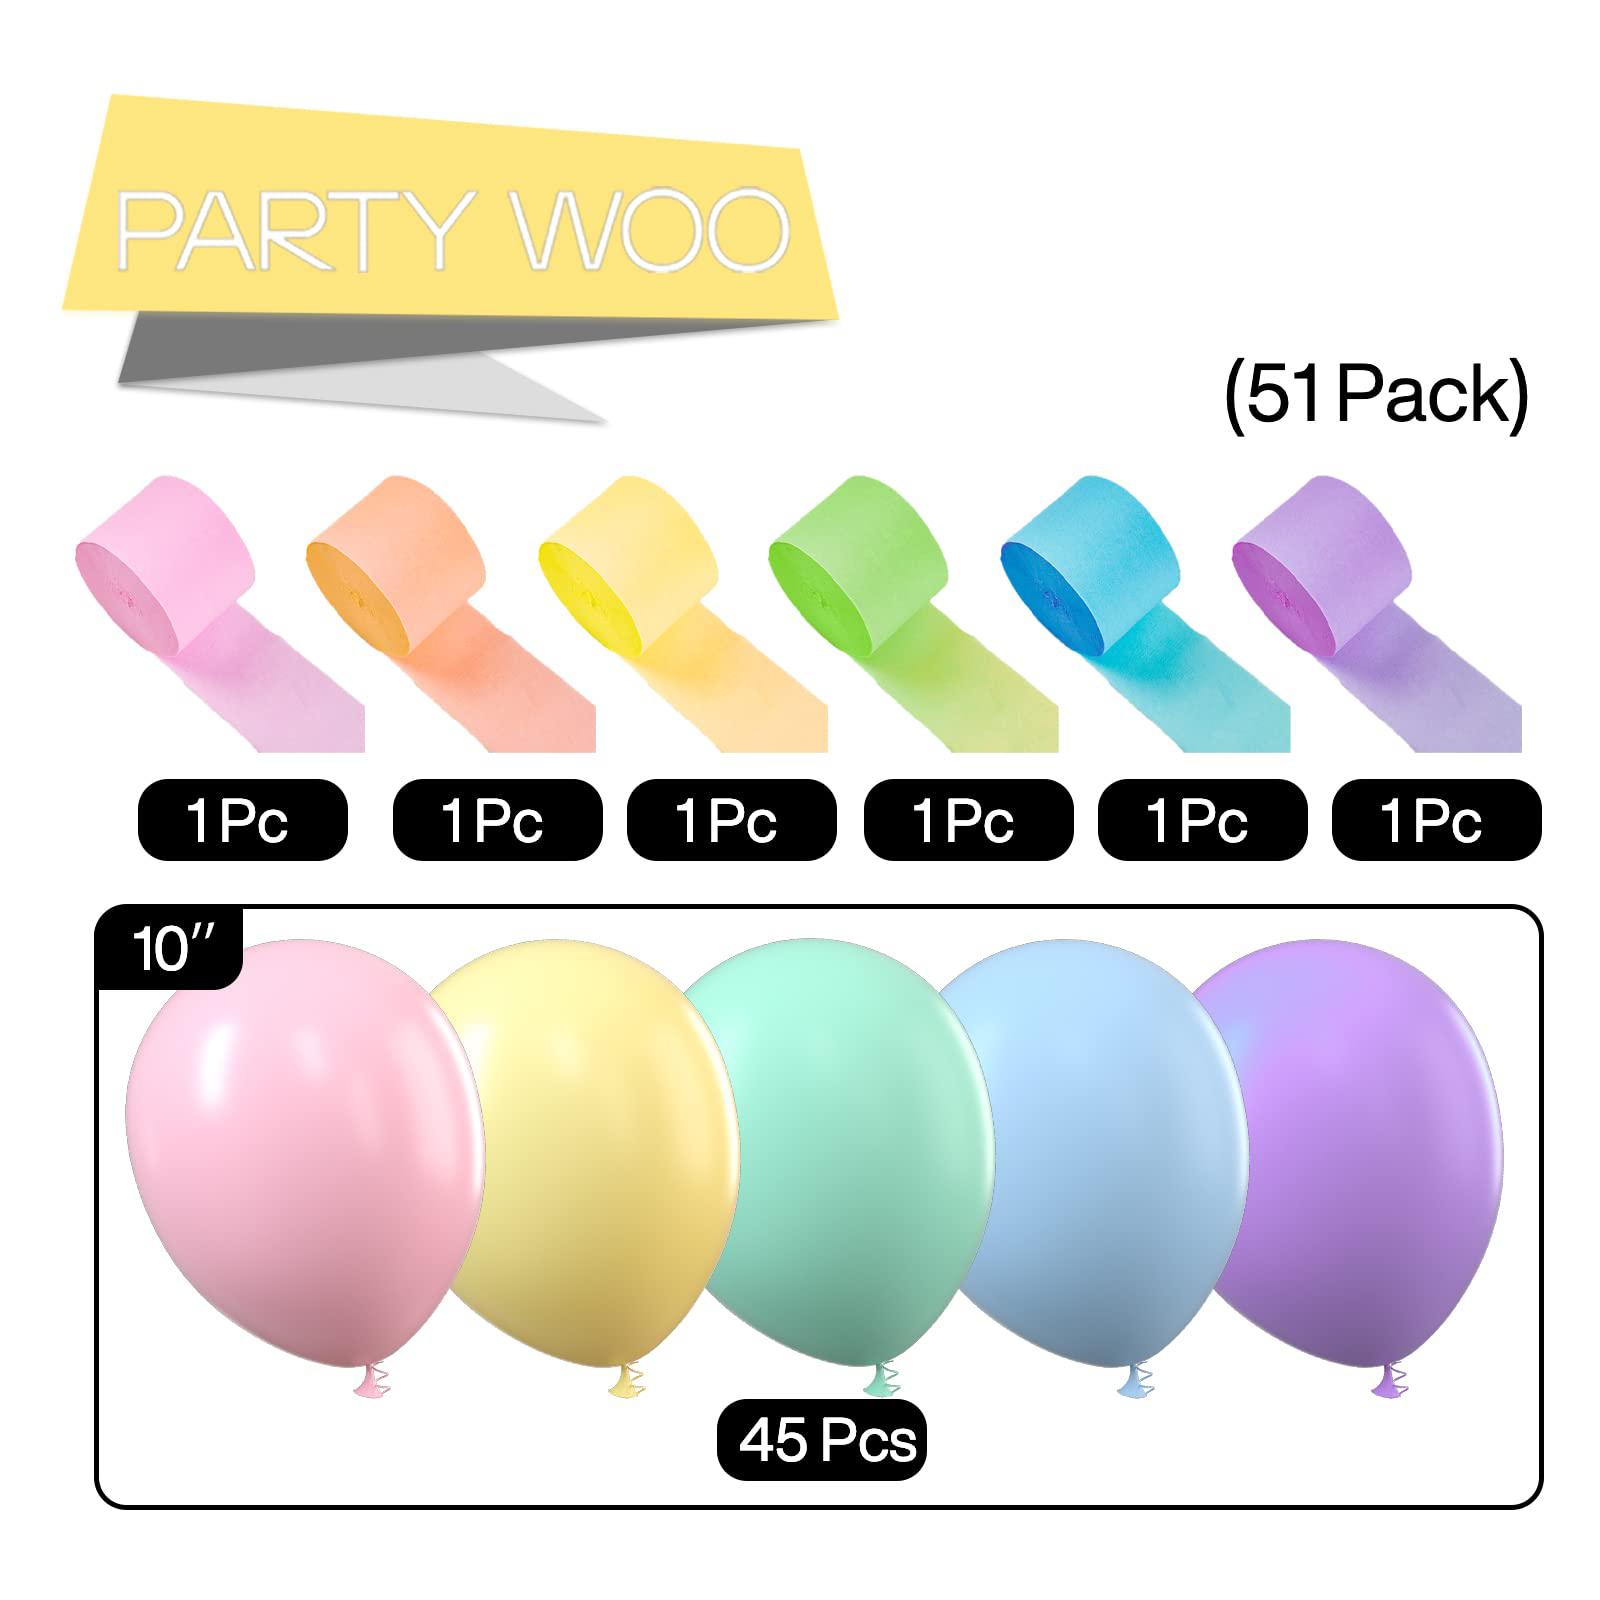 PartyWoo partywoo pastel balloons, 51 pcs party decorations pack of latex  balloons and crepe paper for balloon garland as party decora